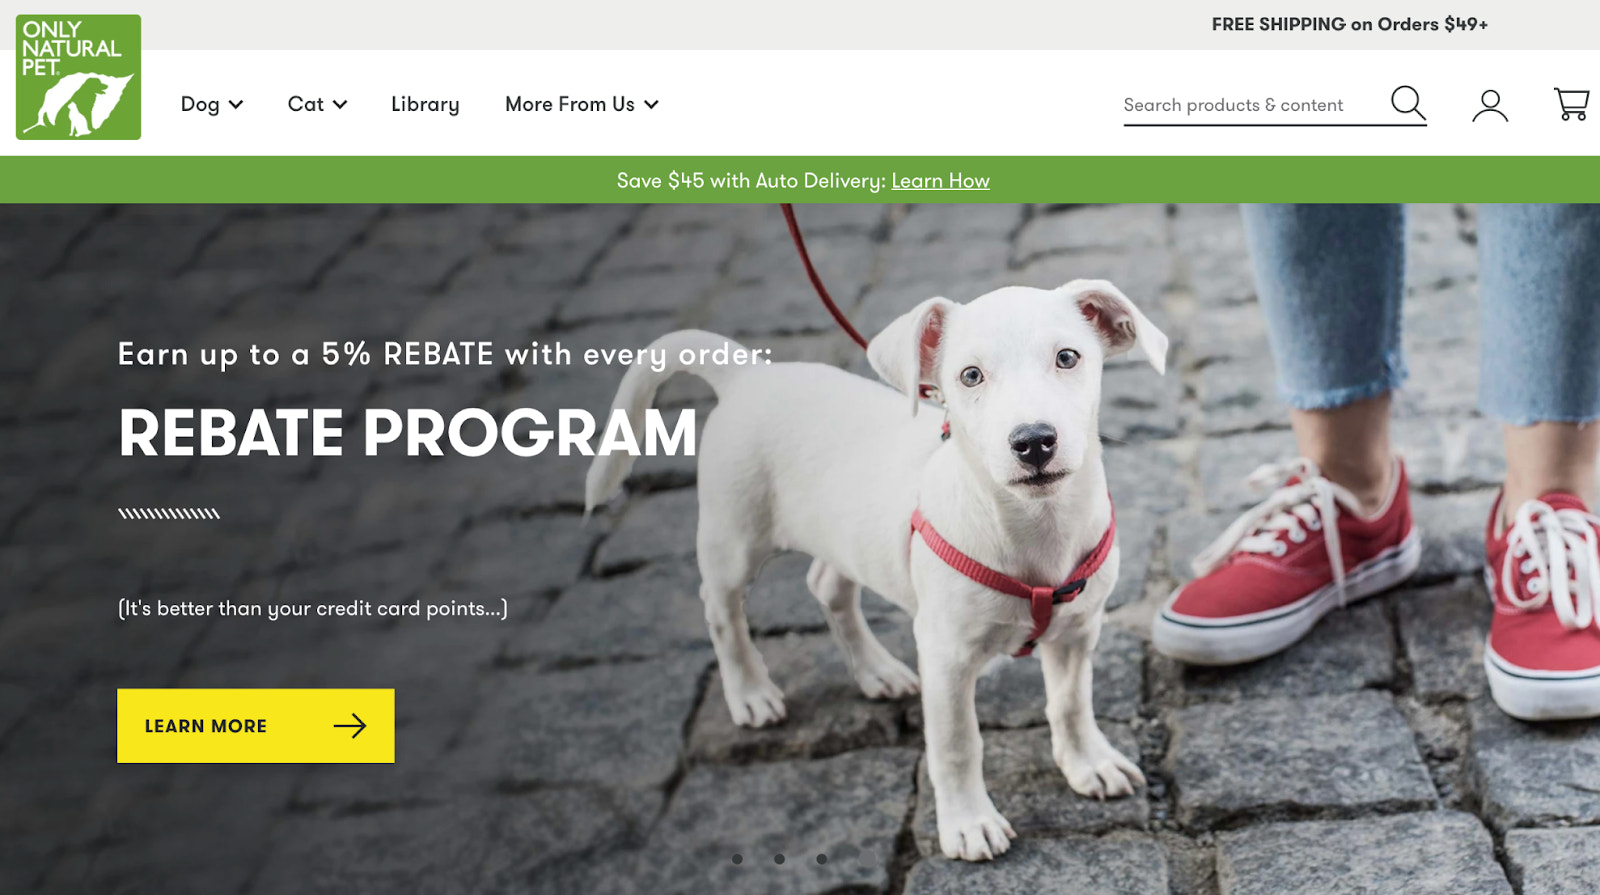 Only Natural Pet homepage